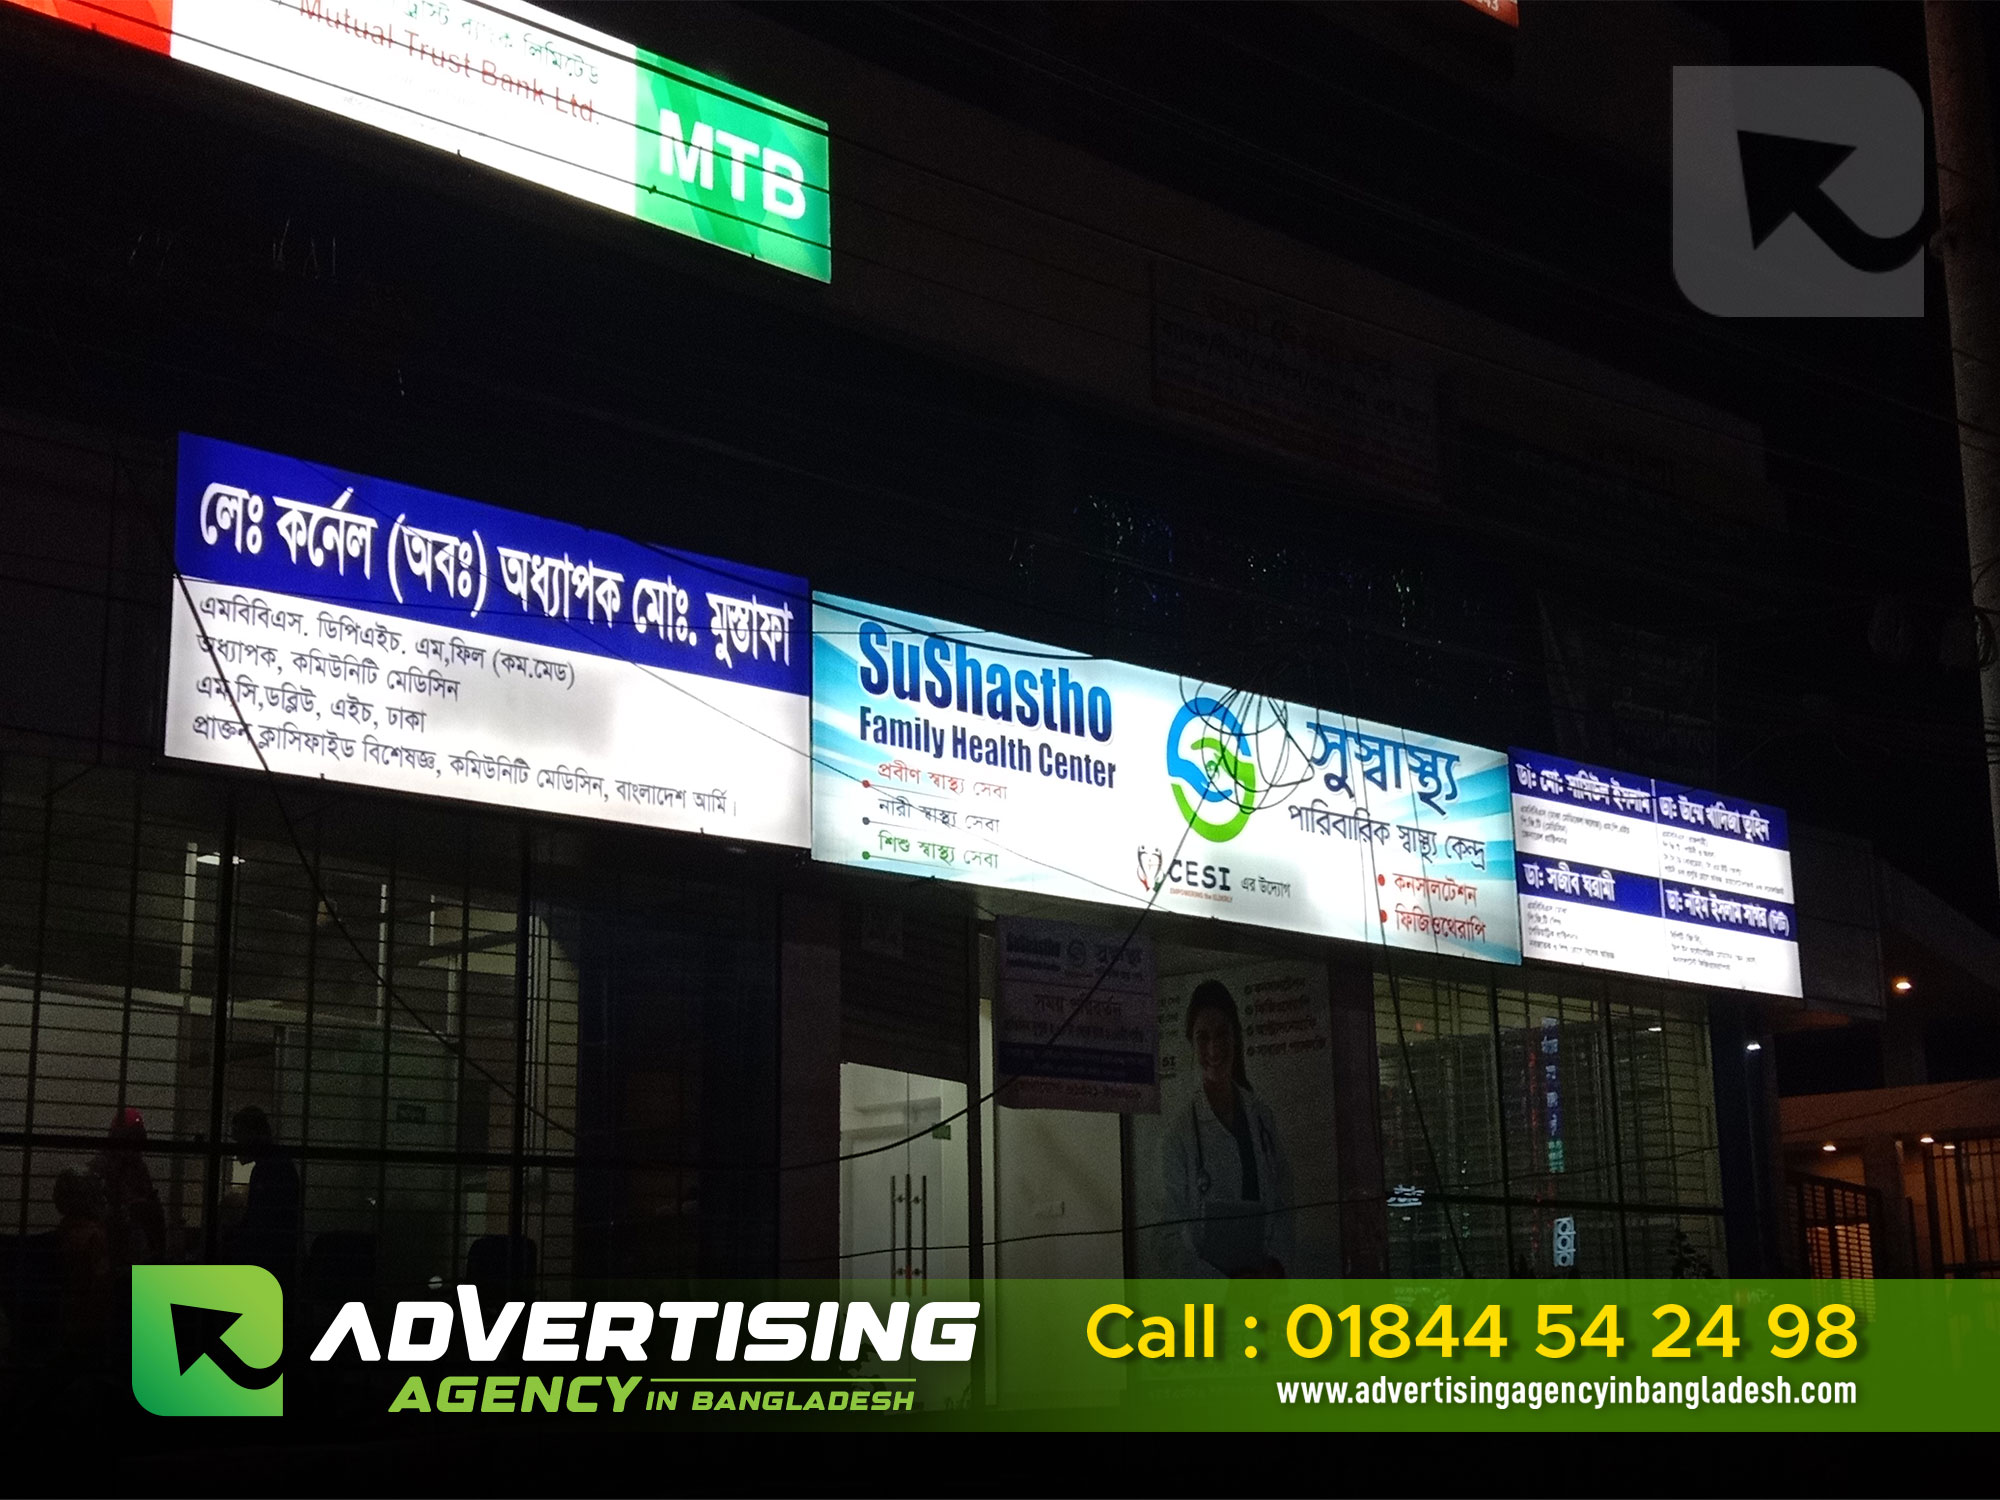 Sign board. Sizes of banners. Best Sign board sign. Dhaka Sign sign board. Sign board design. Led sign board. Digital sign board. Signage design. Sign maker. Pvc banner. Logo banner. Signboard maker. Led signboard. Digital signboard. Standing banners. Signage light. Led light sign board. Home name board design. Signboard led. Poster banners. Signage name. Printed pvc. Banner shops. Sign led board. Sign board digital. Pvc for printing. Design of signage. Bangla sign board. Acrylic sign board. Shop name board design. Name board for shop. Glow sign board. Sign board shop near me. Led board for shop. Led board design. Glow sign board design. Sign board for shop. Menu board design. Sign board near me. Custom signs. Light board design for shop. Banner printing. Custom banners. Sign company near me. Best Led board. Led name board. Led sign board price in bangladesh Sign board makers near me. Business signs. Acrylic sign. Name board. Vinyl banners. Name board design. Sign makers near me. Sign shop near me. Name light board. Signs near me. 3d sign board. Led display board price. Led display board. Acrylic board design. Shop board design. Led letter board. Glow board. Outdoor signs. Lighting board for shop. Shop sign board design. Vinyl print. Digital led sign board. Led sign board design. Vinyl signs. Shop sign. Glow sign board price. Acrylic led sign board. Light board design. Sign printing. Plastic sign board. Panaflex signage. Pvc sign board. Name board design for shop near me. Road sign board. Outdoor signs for business. Led light board. Digital sign board design. Business banner. Easy sign. Banner board. Sign printing near me. Sign board material. House name board design. Advertising board. Acrylic led sign board price. Custom business sign. Signage company. Sign board images. Outdoor banners. pvc sign board price in bangladesh Safety sign board. Led sign board near me. Business signs near me. Sign board design images. Menu display board. House name board. Glow sign board near me. Custom banner printing. Signboard maker near me. Vinyl poster. 3d signage. Shop board maker near me. Vinyl banners printing. Banner signs. Store signage. Company name board design. Make your own sign. Banner near me. Plastic signs. Outdoor sign board. Company name board. Custom outdoor signs. Restaurant menu board. 3d billboards. Shop name board design price. Outdoor sign board design. Sign maker online. Sign board printing. Led board design for shop. Led board price. Light sign board. Company sign board. Acrylic name board. Acrylic board price. Sign board company. Make signs. Wooden sign board. Signage stand. Office sign board. 3d acrylic letter sign board price. Acrylic logo. Office name board design. Quick signs. Led light name board. Big banner. 3d sign board design online. acrylic sign board price in bangladesh Vinyl banners near me. 3d led sign board price. 3d sign board design. Stop sign board. Led light board for shop. Signs online. Flex board design for shop. Sign board price. 3d acrylic letter sign board. Led board near me. Letter board sign. Sign board printing near me. Glowshine board. Business sign maker. Digital name board. Acrylic sign board near me. Restaurant sign board. Restaurant signage. Led sign board price. Shop board design images. Digital menu boards for restaurants. Banners online. Print banner near me. Make sign. Pvc sign. Led name board for shop. Logo signs. Custom sign maker. Create sign. Acrylic sign board price. Lighting board for shop price. Acrylic business sign. Led digital display board. Design signs. Office sign board design. Menu sign. Vinyl banner printing near me. Led menu board. Led glow sign board. Board printing. Acrylic signboard. Led light board design. Outdoor menu board. Acrylic light board. Panaflex material. Office name board. digital sign board price in bangladesh Restaurant signboard design. Custom made banners. Billboard banner. The sign company. Led sign board shop near me. Outdoor led display board. Large banner. Wooden name board. Led sign board manufacturers. Top sign. Vinyl sign printing. Large banner printing. Acrylic glow sign board. Create your own sign. Business sign board. Sign board manufacturers near me. Sign design near me. Road sign board design. Lighting name board design. Print big. Custom acrylic sign. 3d board design. Panaflex banner. Small banner. Outdoor banner printing. Design your own sign. Sign design online. Logo sign board. Poster signs. Signs made. Company banners. Sign material. Project signboard. Sign board stand. Signboard size. Hanging sign board. led display board suppliers in bangladesh Latest sign board design. Signboard price. Led banner board. Glow sign board shop near me. Acrylic board design for shop. Real estate billboard. Plastic banner. Custom sign board. Acrylic letter board. Flex board design for shop near me. Board signage. Signboard material. Name board makers near me. Banner signs near me. Pharmacy sign board. Order signs. Medical store board design. Pvc banner printing. Open close board. Led sign board design for shop. Pharmacy sign board design. 3d letter sign board. Digital menu board design. Home name board. Sign board design maker online. Types of sign boards. Best banners. Standing banner signs. Advertisement board design. Custom signs online. Sign board design near me. Digital board for shop. Vinyl sign board. Best sign board design. Sign board manufacturers. Light display board for shop. Design 4. 3d signboard. Signboard design Signage project. Board makers near me. Led display board design. Shop light board design. Banner printing price. Medical shop board design. Restaurant digital signage. Led display board for shop. Light name board for shop. Sign board company near me. Custom sign printing. Signboard near me. Mini billboard. 3d led sign board. Signage industry. Pvc sign board material. Sign board size. Outdoor sign board material. Flex sign board. Signboard shop near me. Digital signage design. 3d name board. Led board maker. Name sign board. Digital banner printing near me. Sign board online. Wooden sign board design. Acrylic sign board design. Store signage design. Advertisement signs. Outdoor led display board price. Banner order. Led sign board design online. Reflective sign board. Vinyl board printing. Banner size for printing. Outdoor digital menu boards. Lighting name board design for shop. Open sign board. Signage size. Signboard narayanganj Office signage design. Led sign board online. Shop flex board design images. Digital name board for shop. Board banner. Outdoor led sign board. Signage business. Glass sign board. Logo light board. Signs for you. Restaurant name board design. Banner board for shop. 3d sign board maker near me. Shop sign board design online. Sign board design maker. Shop name board flex design. 3d sign board price. Vinyl banner sizes. Stand board for shop. Banner printing online. Light banner for shop. Banner store near me. Poster board signs. Wooden name board design. Acrylic menu board. Open close board for shop. Light sign board design. Signage work. Company sign board design. Pharmacy signage. Sign board design online. Led sign board for shop. 3d signage design. Hanging menu board. Name led board. Menu sign board. Signage supplier. Store sign maker. Led sign board manufacturers near me. Digital menu boards for sale. Medical sign board. PVC Board Price in Bangladesh, PVC Off Cut Board BD Shop name light board. Sign board design for office. Vinyl poster printing near me. Custom banners online. 3d letter board. Name display board. Glow board for shop. Advertisement board for shop. Road sign board with name. Signboard printing. Lighting name board price. Shop sign design. Light letter board. Order banner online. Sign business for sale. Led menu display board. Designer signs. Digital sign board price. Acrylic light board price. Acrylic led board. Outdoor banner size. Panaflex signage price. Led name board price. Restaurant signage design. Open closed sign board. 3d acrylic sign board. Pvc banner printing near me. Digital sign board for shop. Display sign board. Signage shop. Road safety sign boards. Large sign printing. Big banner printing. Radium sign board. Digital sign board near me. Led menu boards for restaurants. Sign panel. Led display sign board. Sign board for shop near me. Glow board design. Sign board cost. Banner light board. Digital Print PVC Sticker Pana Lighting Signboard 3d light board. Real estate sign boards. Small billboard. Quick banners. Business sign maker near me. Sticker signage. Advertising sign boards. Design print banner. Light box signboard. Acrylic logo with light. Acrylic banner. Outdoor sign material. Banner signboard. Led name board design. Wooden menu boards. Type of signage. Signage led. Restaurant menu board design. 3d shop board. Banner printing cost. Store name board. Acrylic name board design. Custom menu board. Signboard 3d. Banners made. Shop sign board price. Company name board with address. Type of banner. Sign in board. Ss sign board. Acrylic sign printing. Name board design near me. Name board shop. Acrylic letter sign board. Acrylic sign board with led. Vinyl board price. Led letter sign board. Banners store. The banner shop. Signs display. Acrylic logo signage. Board light design. PVC BOARD PRICE CHART PER SQUARE FIT Display signs for businesses. Signage design maker. Billboard led. Company signboard design. Signage box. Shop sign board images. Side sign. Banner custom design. Buy signs. Large outdoor signs. Banner sign company. Banner printing service. Board led. Door sign board. Led logo sign board. Light board maker near me. Signage frame. Standing menu board. Acrylic led sign board near me. Glow sign board design for shop. Digital 3d sign board. Restaurant light board design. Led letter board price. Order signs online. Banner materials. Business signage design. Shop Sign Bangladesh 3d acrylic letter sign board near me. Advertising board price. Store board design. Different types of sign boards. Outdoor advertising boards. 3d acrylic signage. 3d board design for shop. Sign & digital. 3d glow sign board. Side sign board. Board light led. Signage light box. Make signs near me. Large signs for business. Signage designer. Shop board price. Outdoor signage design. For sale boards. Signage acrylic board. Outdoor led billboard. Glow sign board for shop. Sign making company. Name board design shop near me. Pvc board printing. Lift sign board. Best LED Display Panel in Bangladesh Led sign board makers near me. Illuminated sign board. Lighting banner board. Billboard signs near me. 3d board for shop. Banner rate. Acrylic logo maker near me. Old billboard. Name board printing near me. Billboard posters. Road closed sign board. Indication board. Business sign board design. Ss letter sign board. Digital display board for shop. Store signboard. Open led sign board. Store name board design. Real estate frames. Vinyl poster printing. Real estate sign board design. Signage price. Advertising board types.